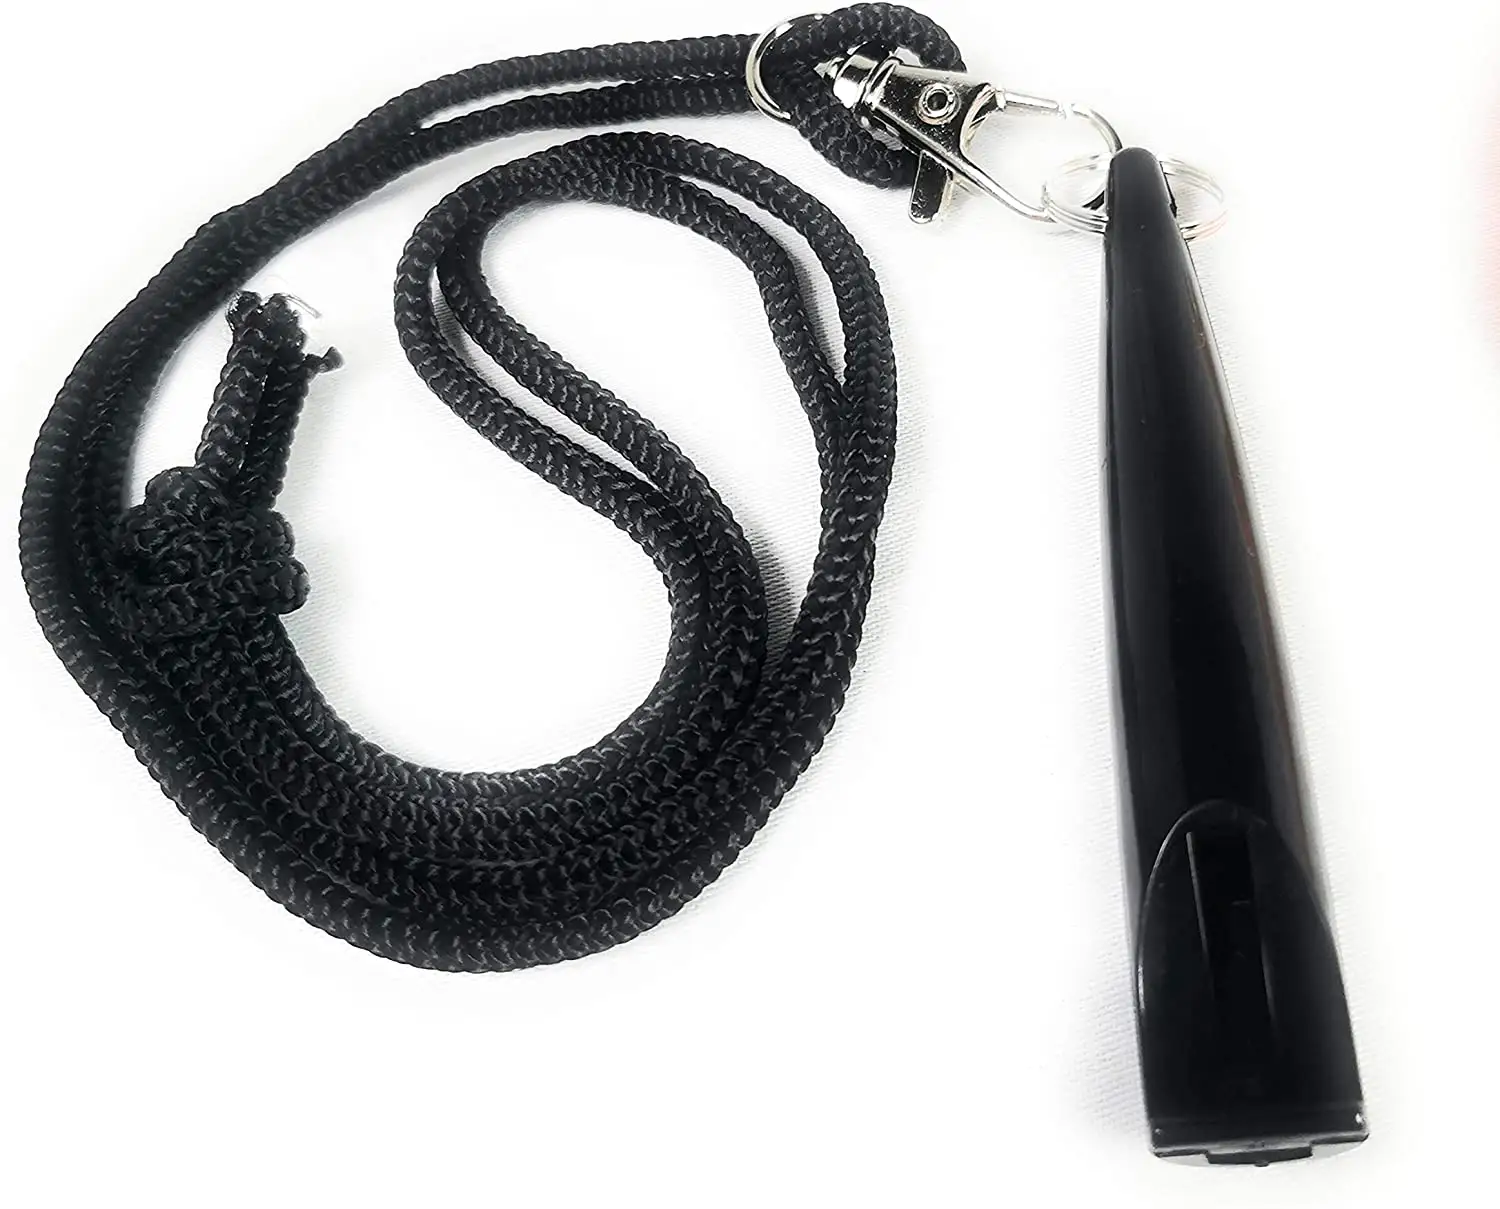 Professional High Pitch Plastic Dog Whistles for Recall Training Complete with Rope Lanyards and Keyrings